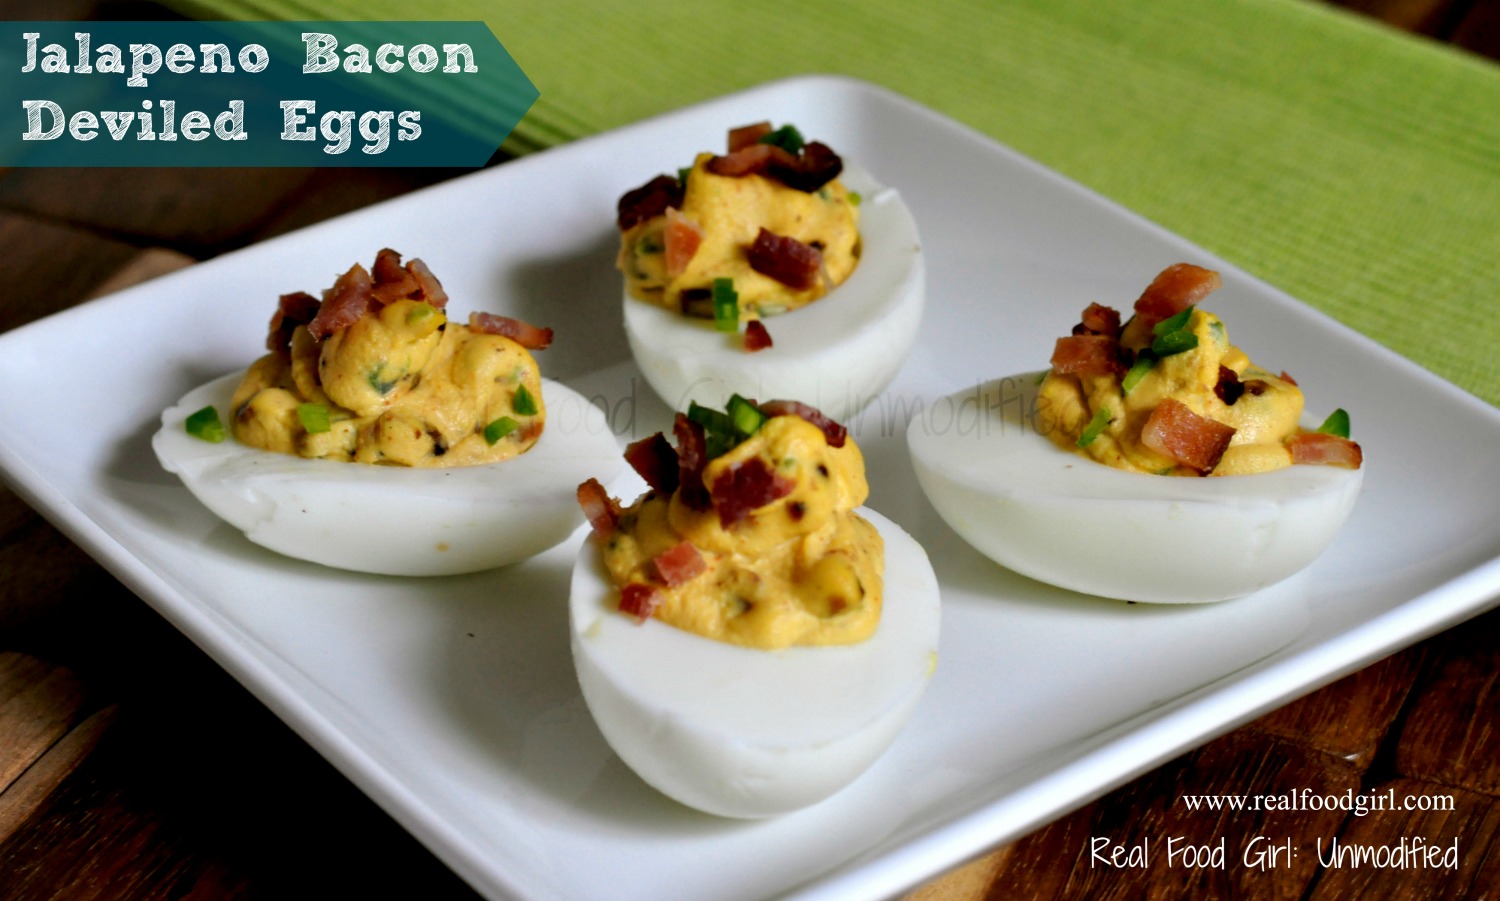 Jalapeno Bacon Deviled Eggs. Oh YES I did! Real Food Girl: Unmodified